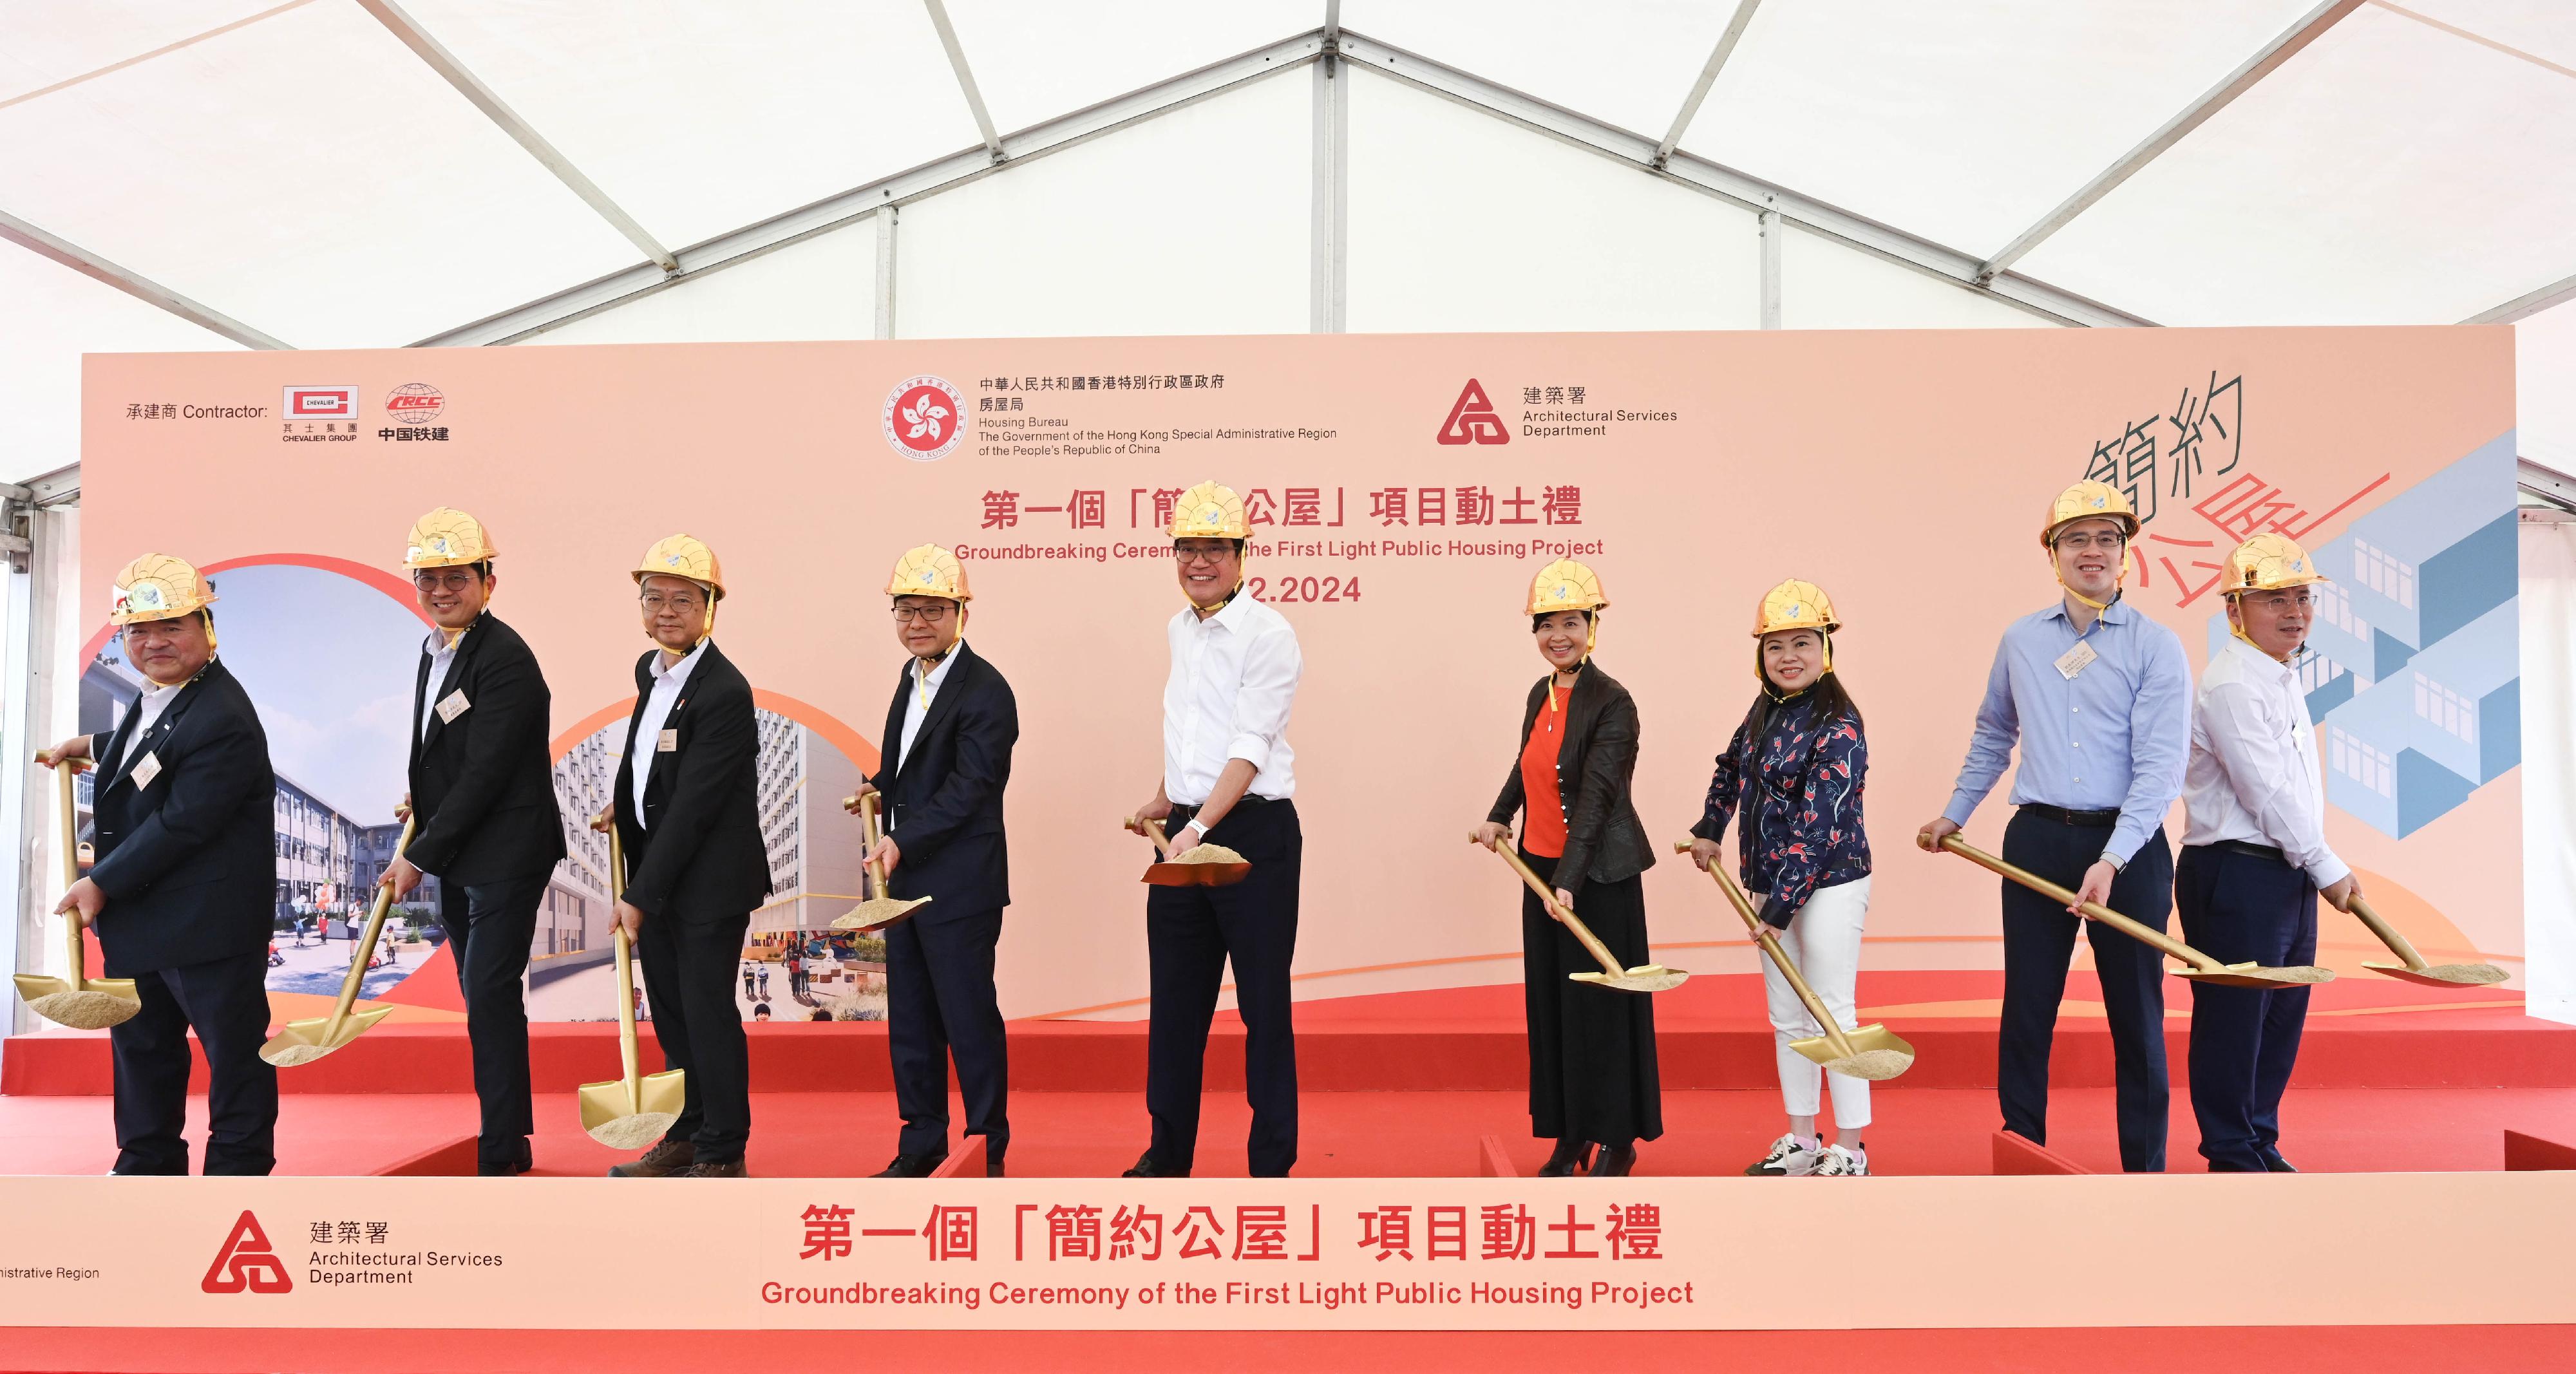 The groundbreaking ceremony for the first Light Public Housing (LPH) project was held this afternoon (February 19) at Yau Pok Road, Yuen Long, showcasing the determination and execution capability of the Government in addressing the housing problem. Photo shows (from left) the Chairman and Managing Director of the Chevalier Group, Mr Kuok Hoi-sang; the Director of Architectural Services, Mr Michael Li; the Under Secretary for Housing, Mr Victor Tai; the Secretary for Labour and Welfare, Mr Chris Sun; the Deputy Financial Secretary, Mr Michael Wong; the Secretary for Housing, Ms Winnie Ho; the Permanent Secretary for Housing, Miss Rosanna Law; Executive Director of Sun Hung Kai Properties Mr Adam Kwok; the Chairman of the China Railway Construction Group Company Limited, Mr Mei Hongliang, officiating at the groundbreaking ceremony.